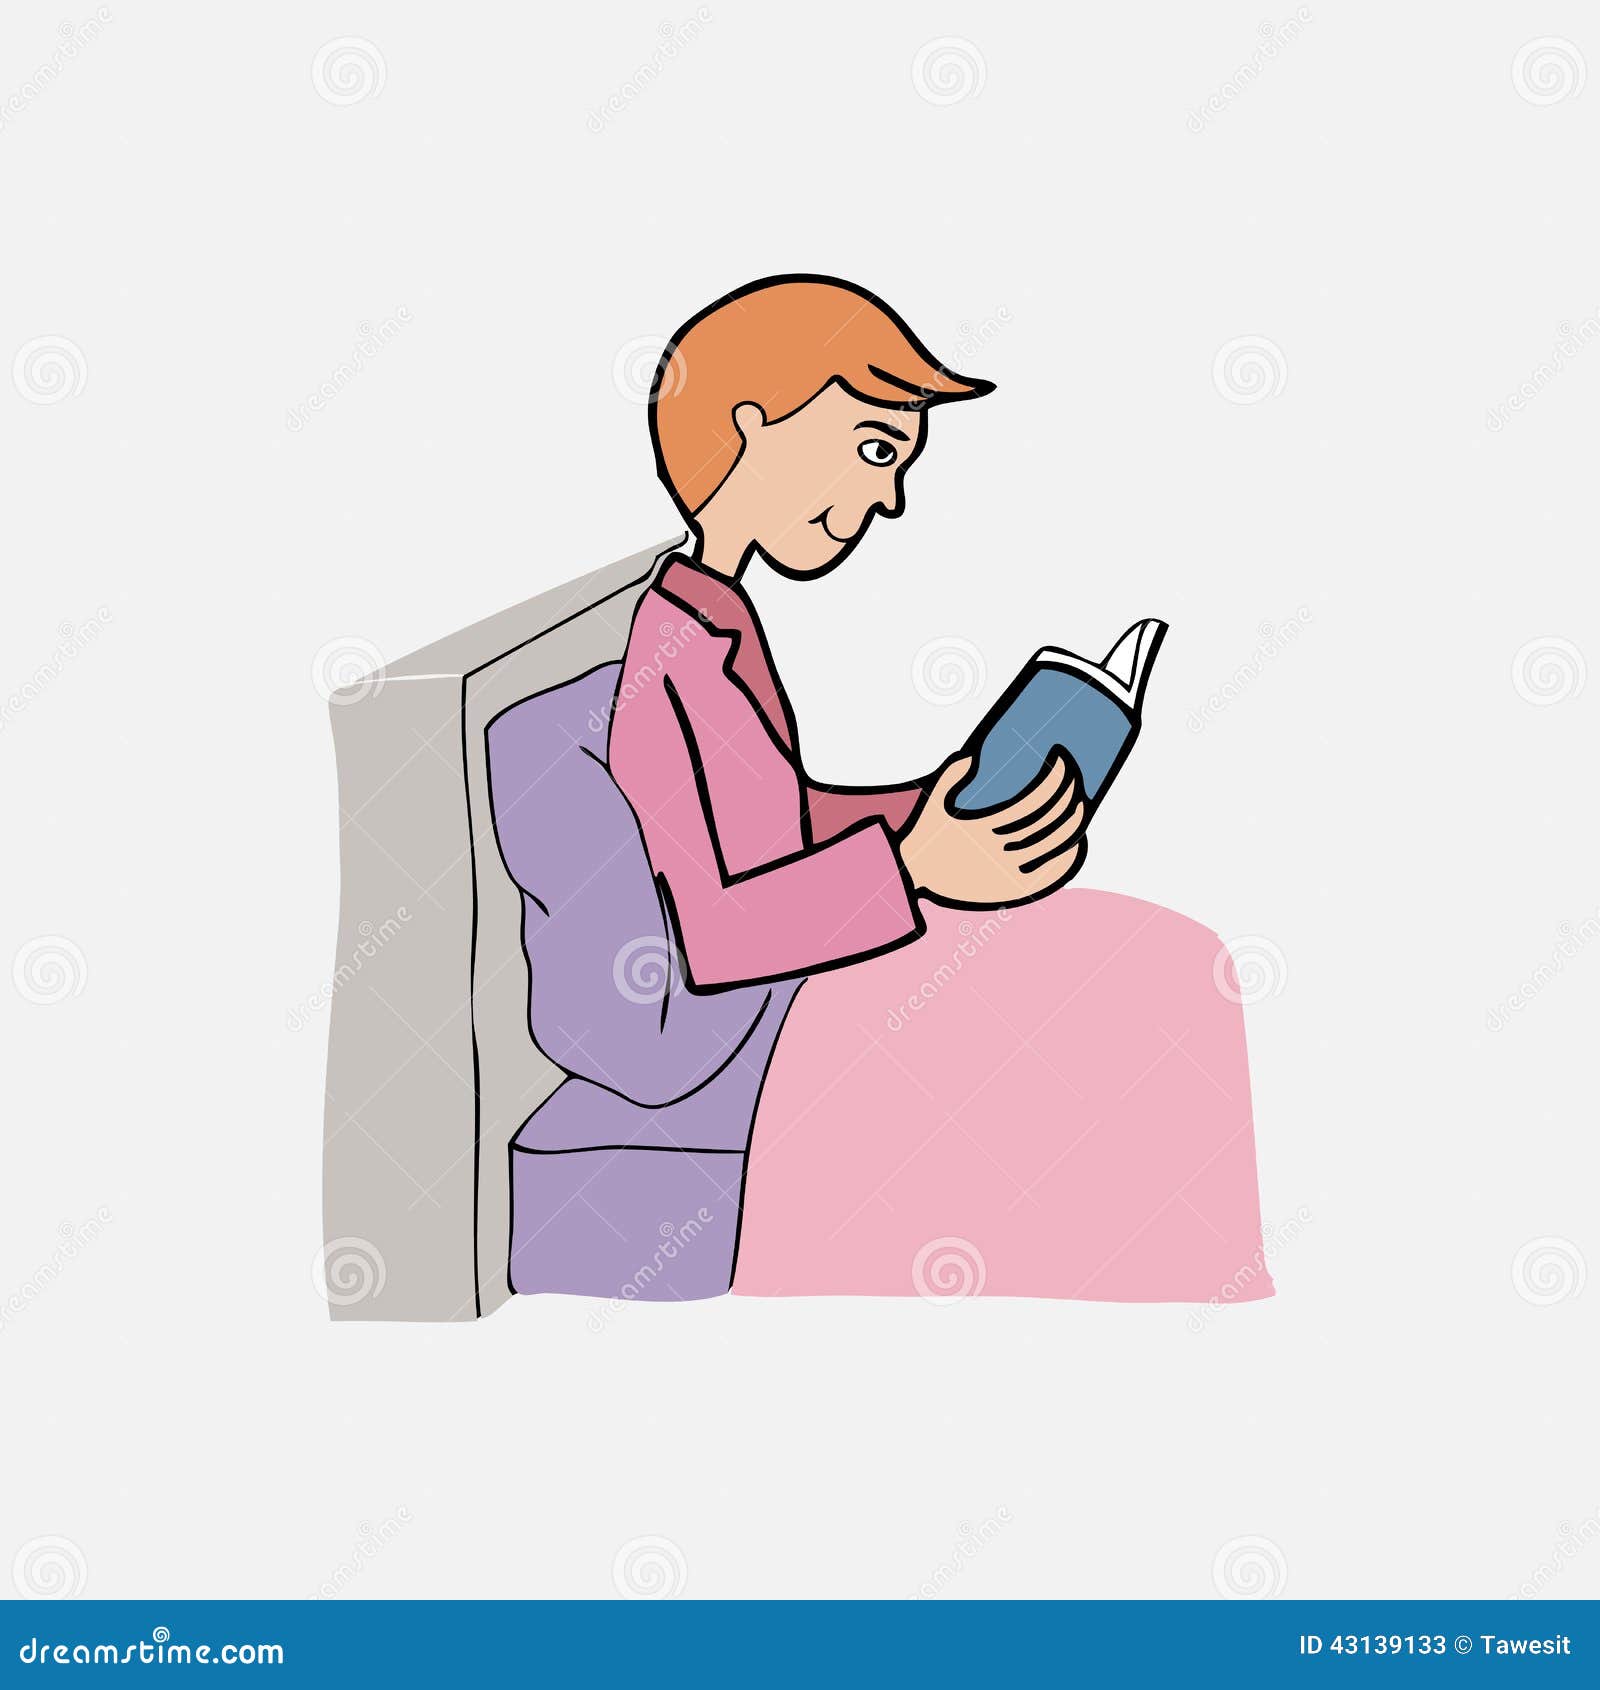 Boy Reads Book On Bed Stock Vector - Image: 43139133